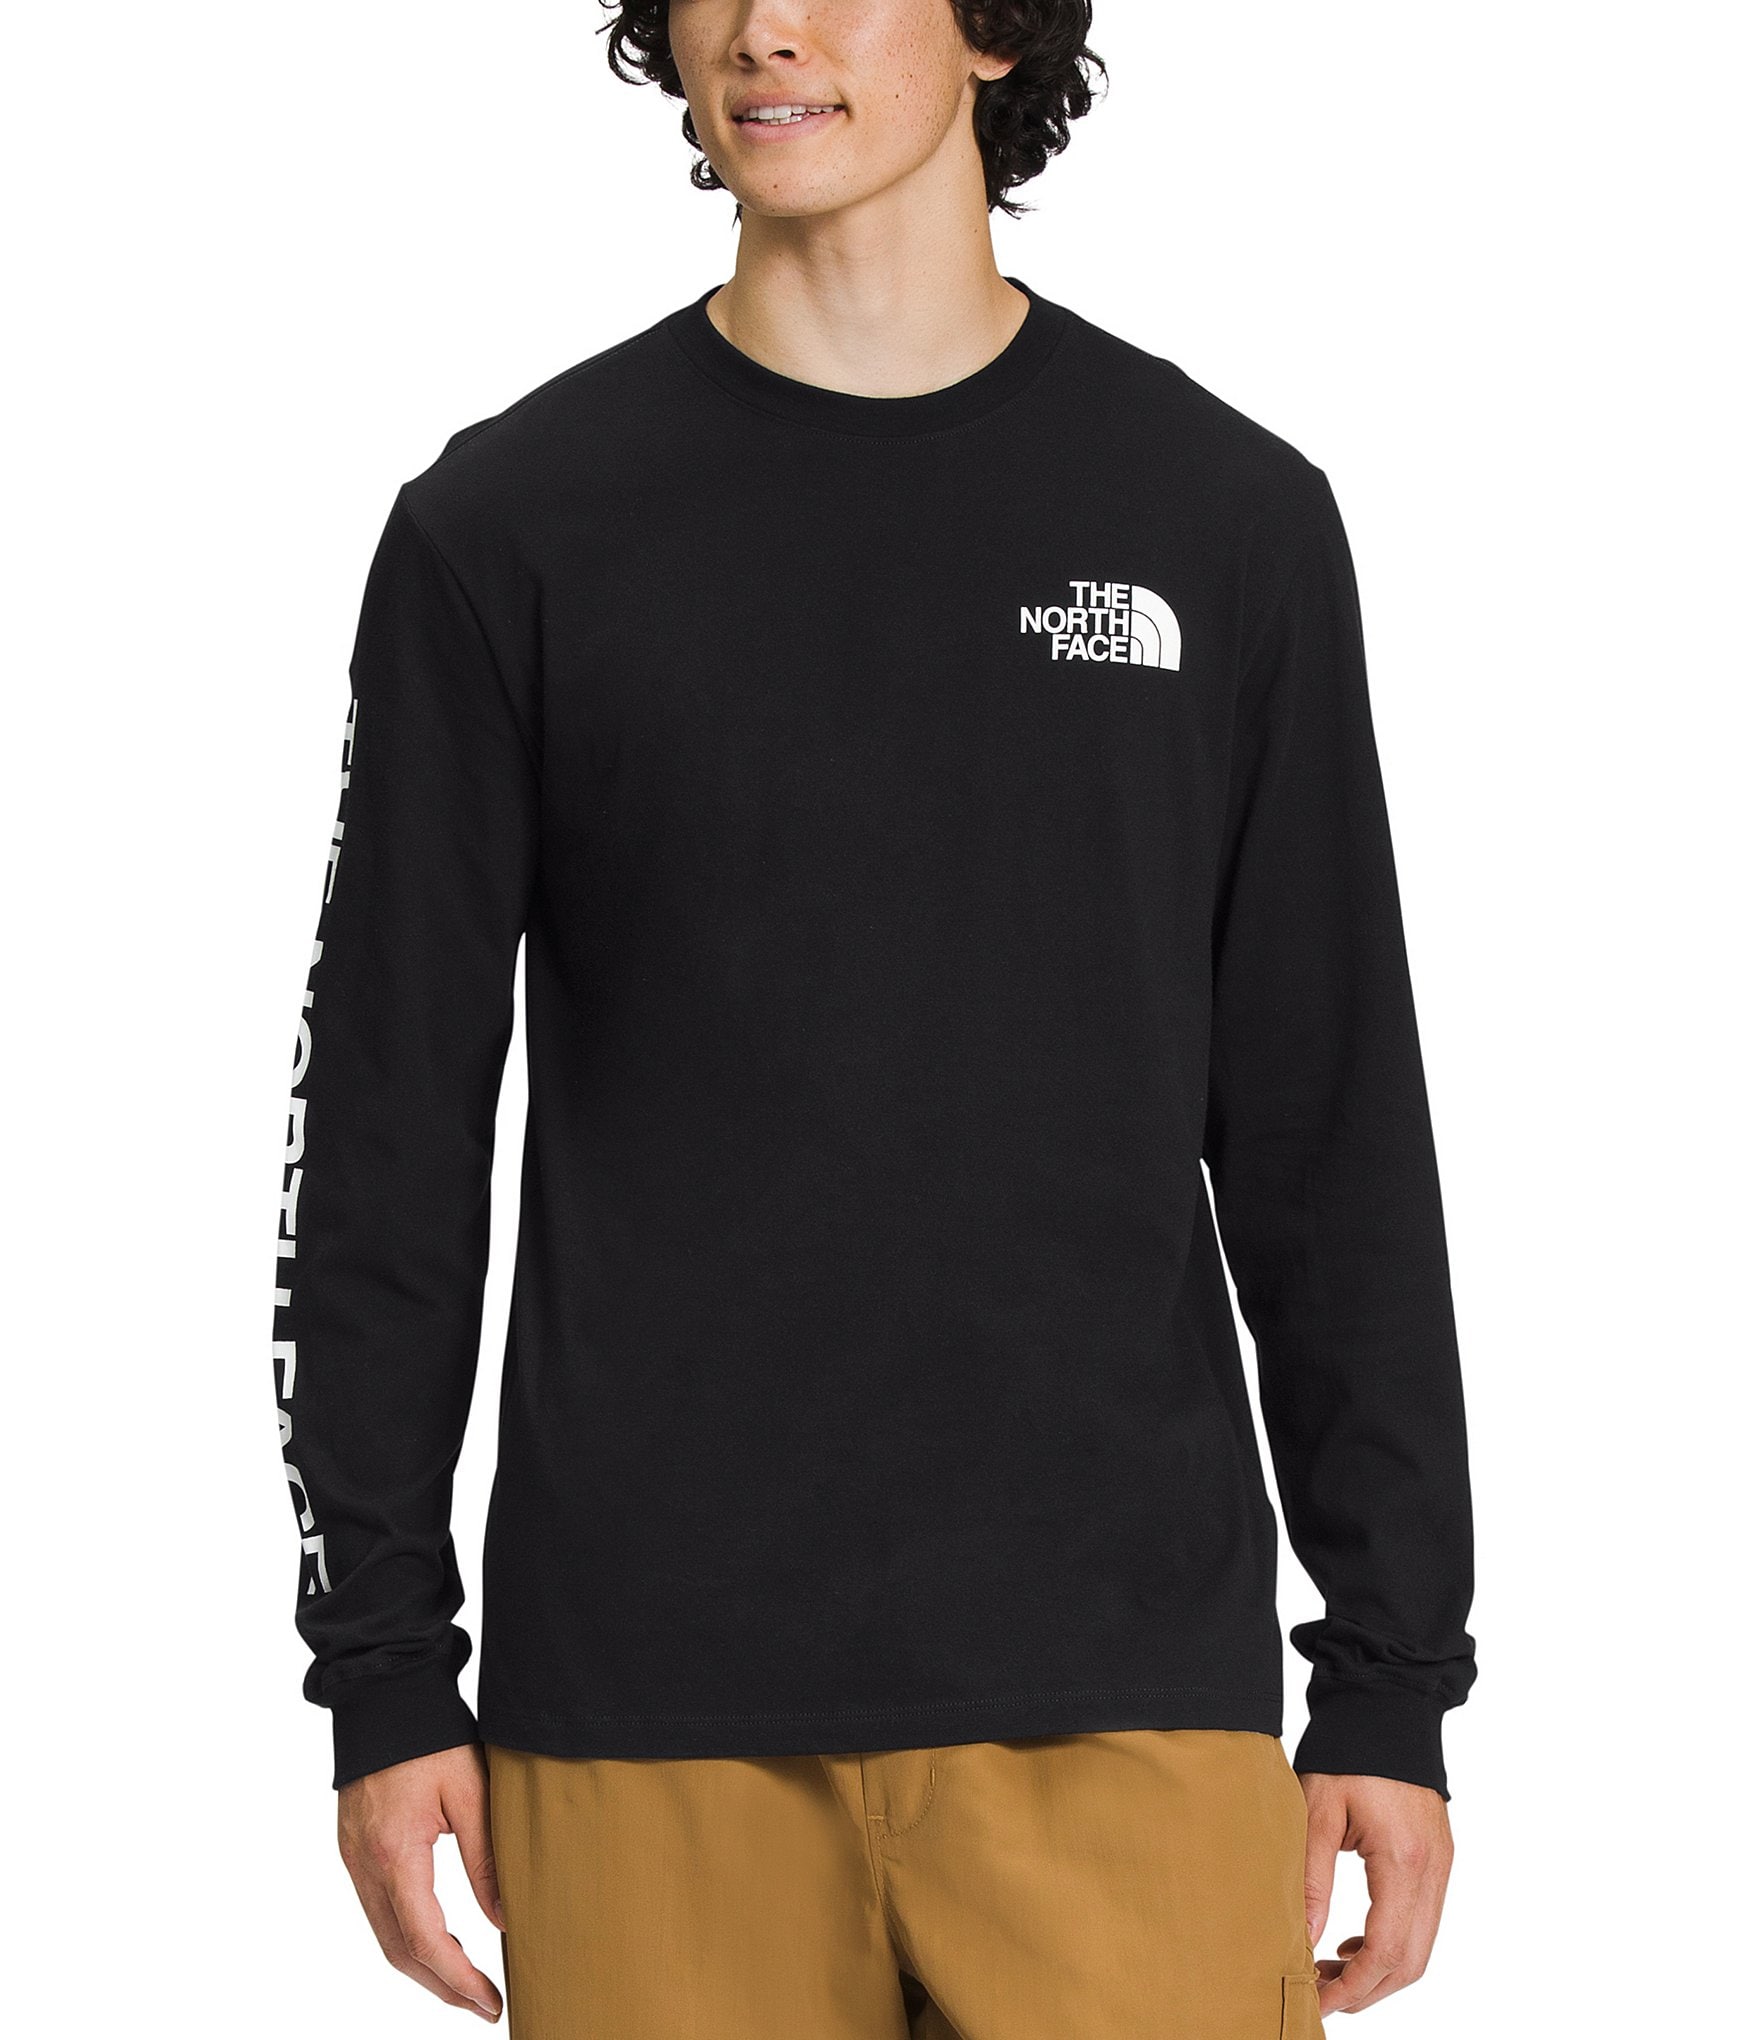 The North Face Long Sleeve Hit Graphic Tee | Dillard's